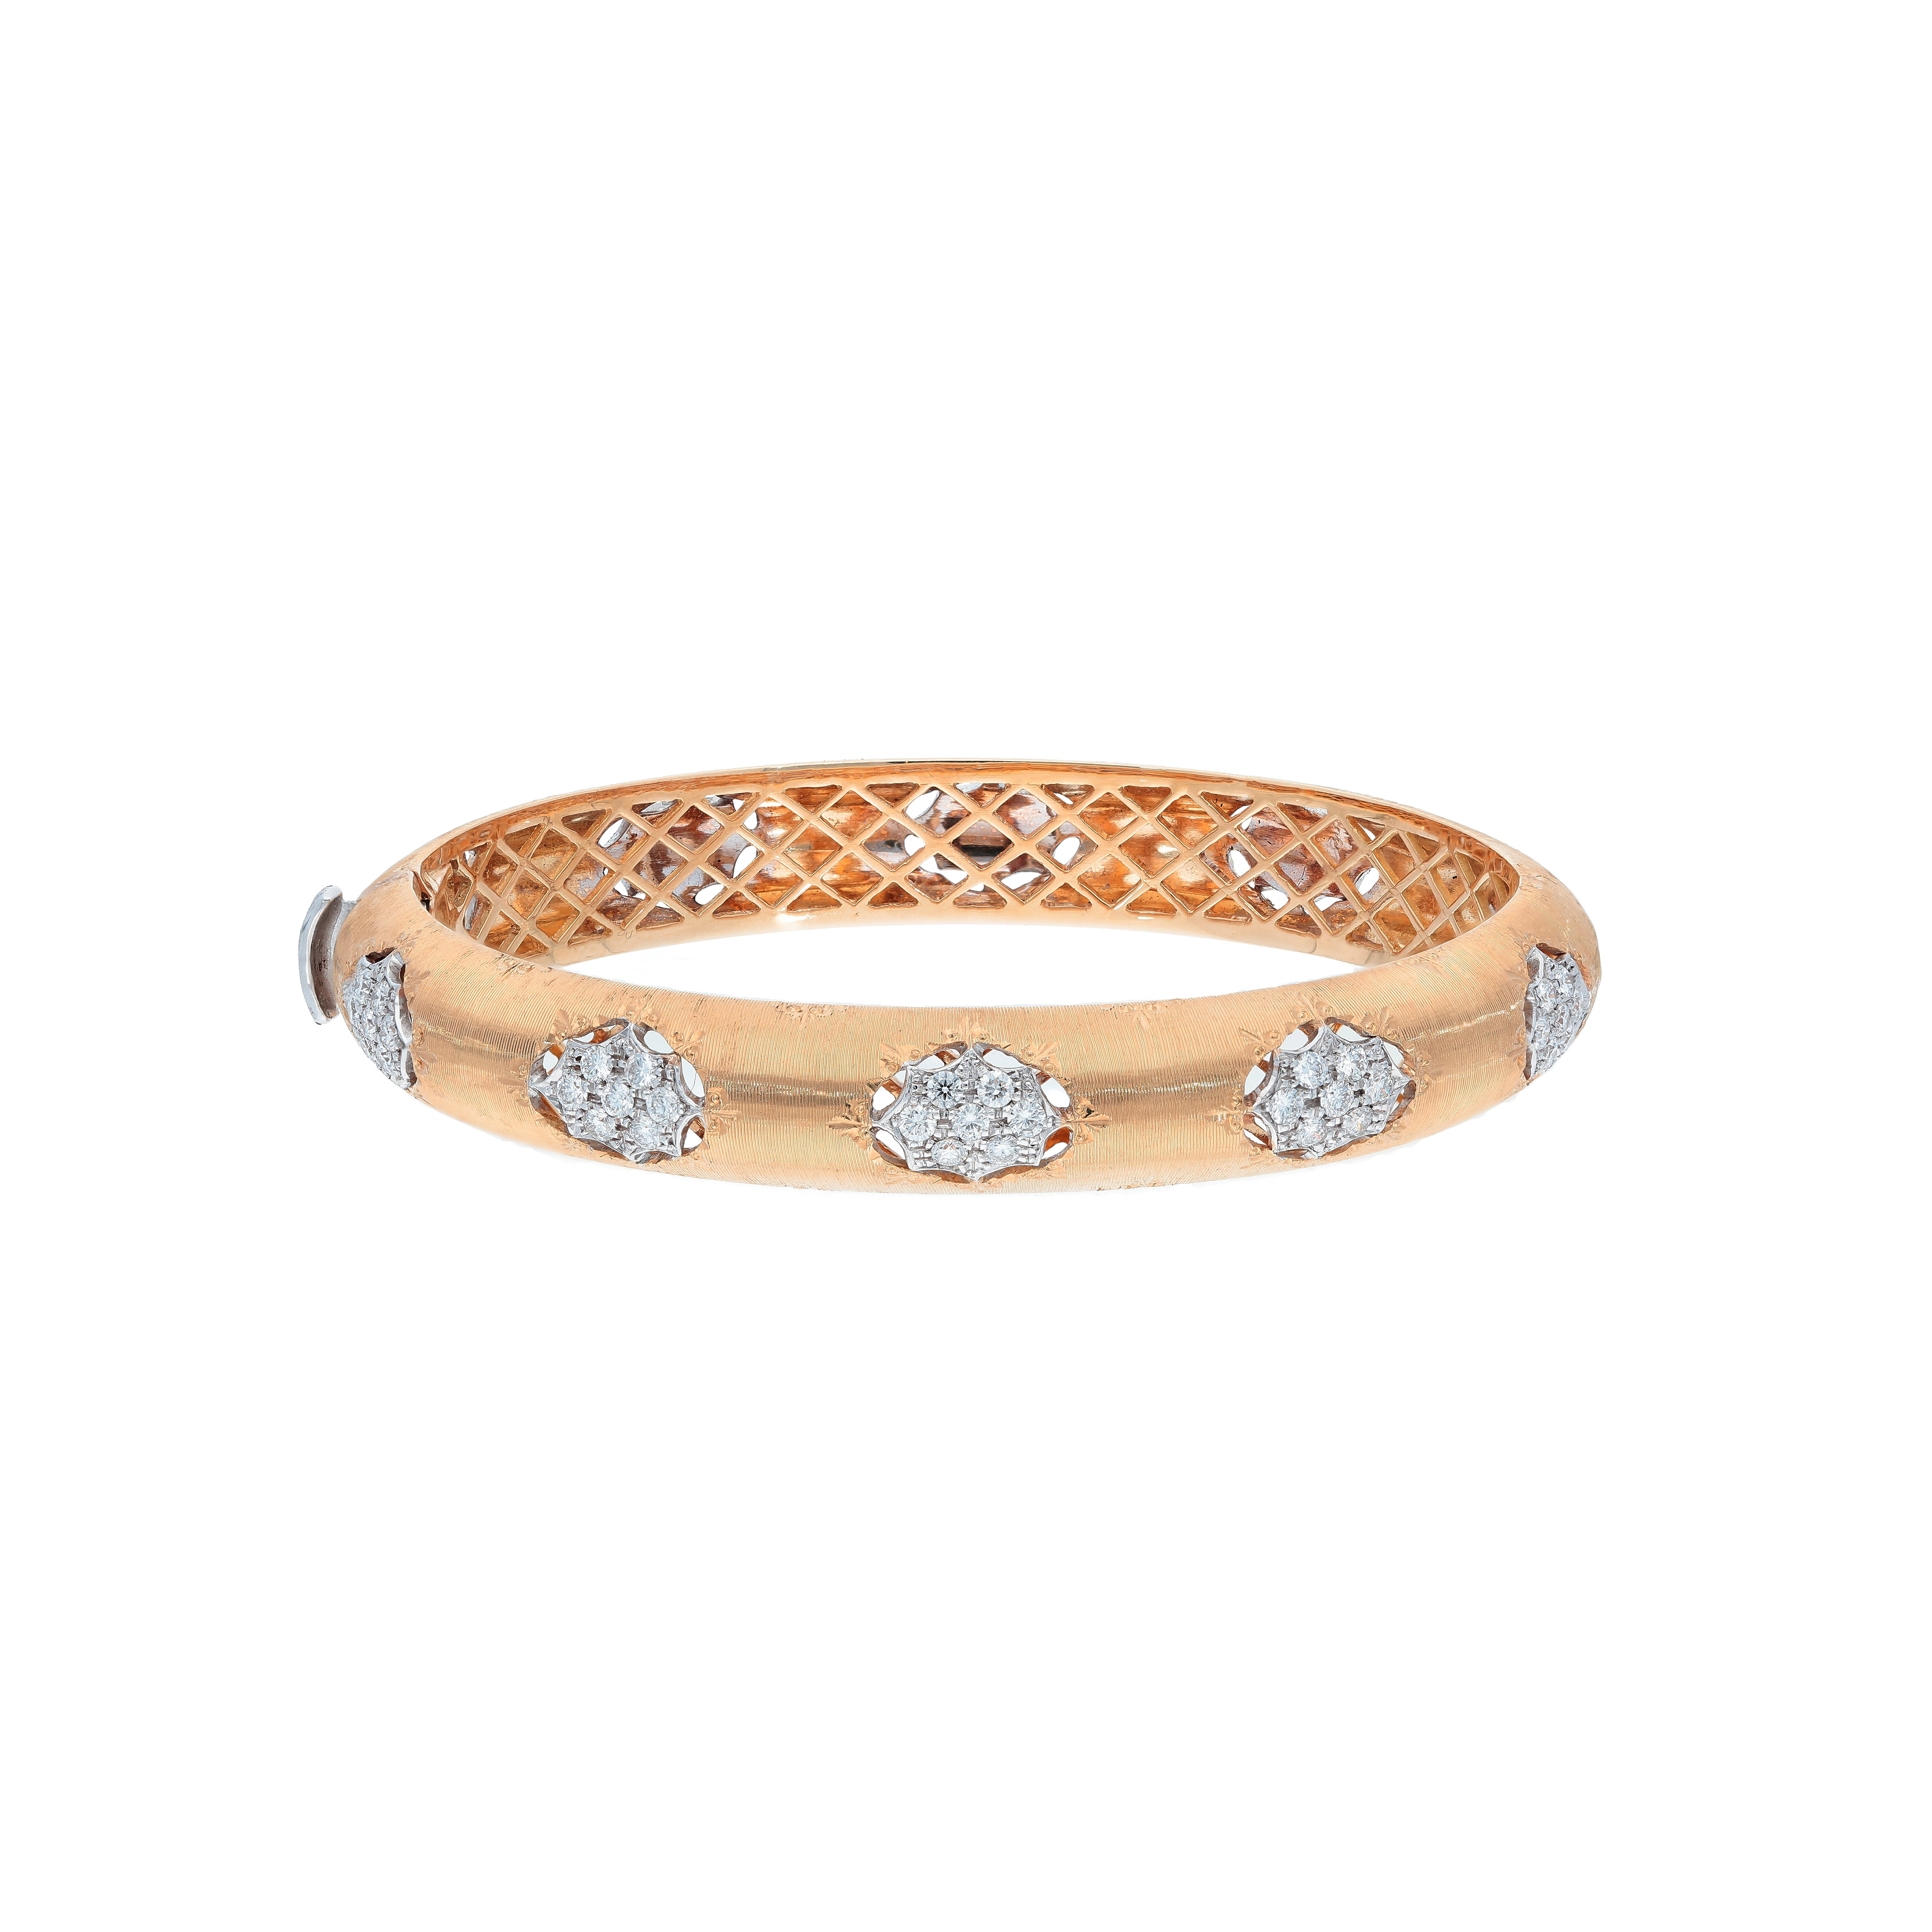 Florentine Finish 18kt rose and white gold with diamonds